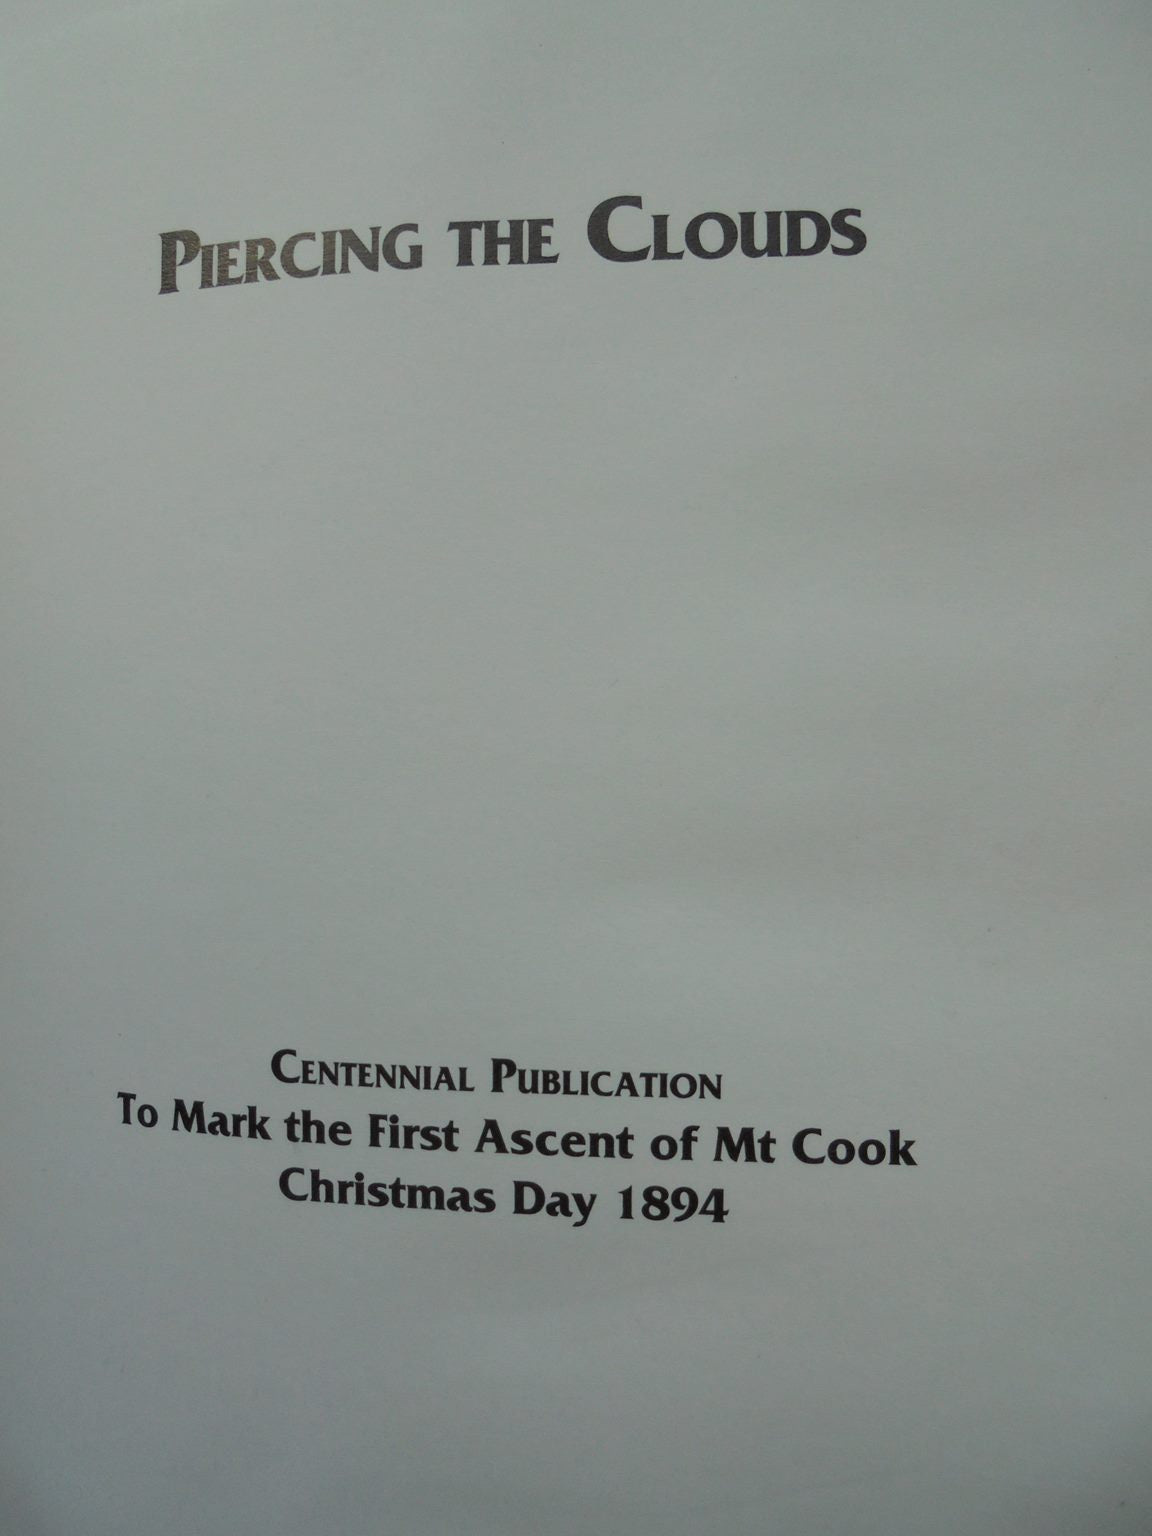 Piercing the clouds - Tom Fyfe: First to Climb Mt Cook - by John Haynes.